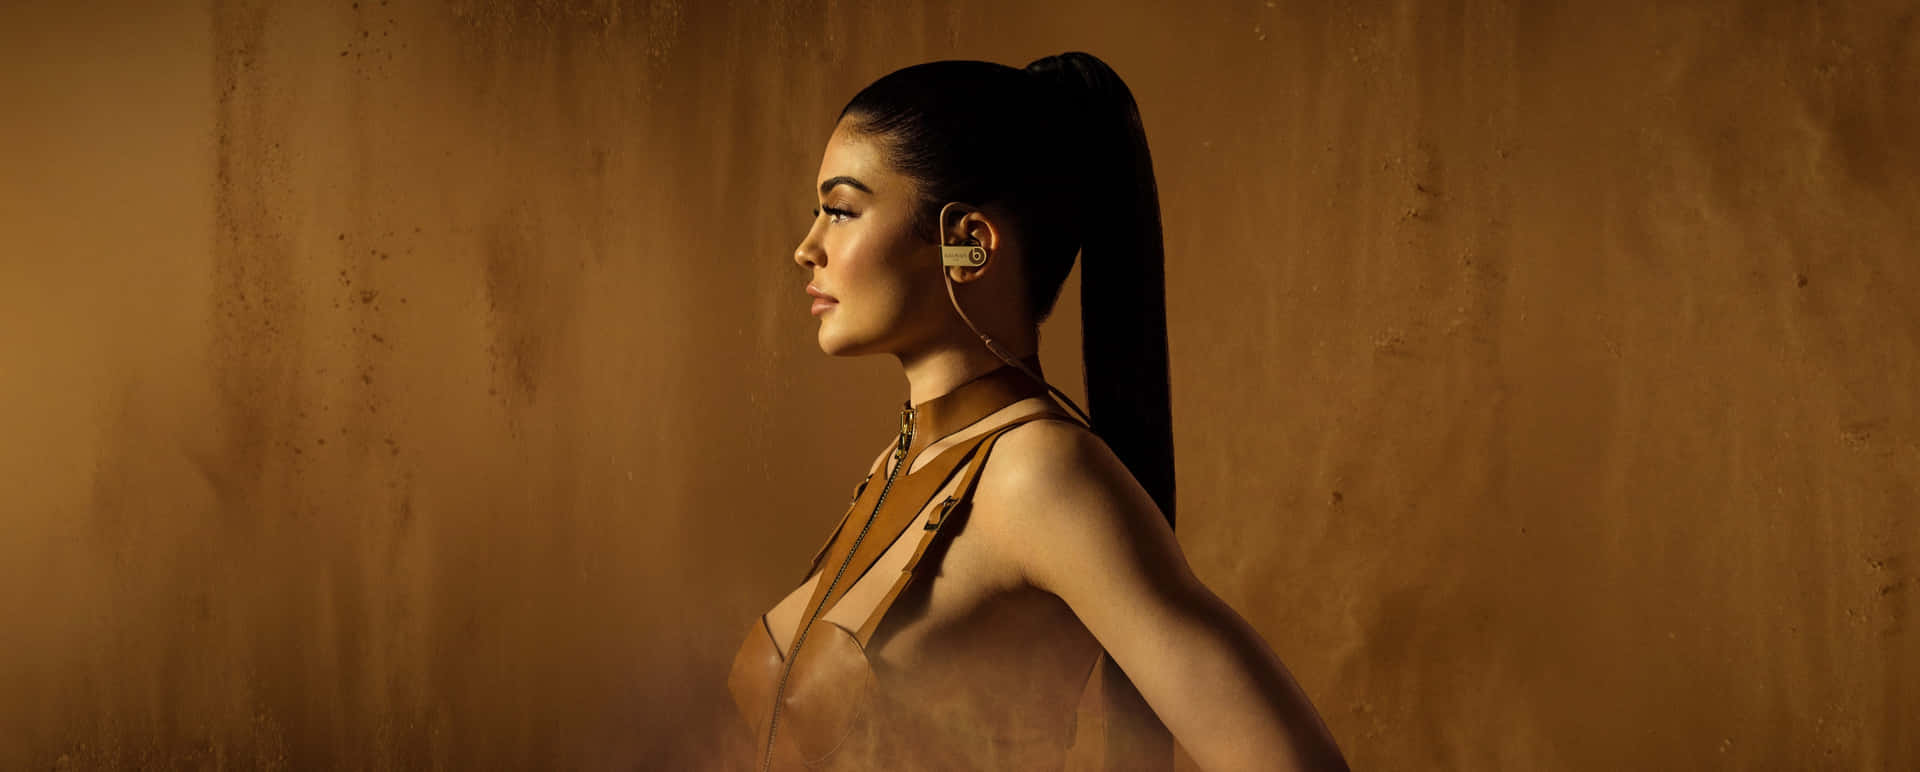 Kylie Jenner stuns viewers in her 4K appearance Wallpaper